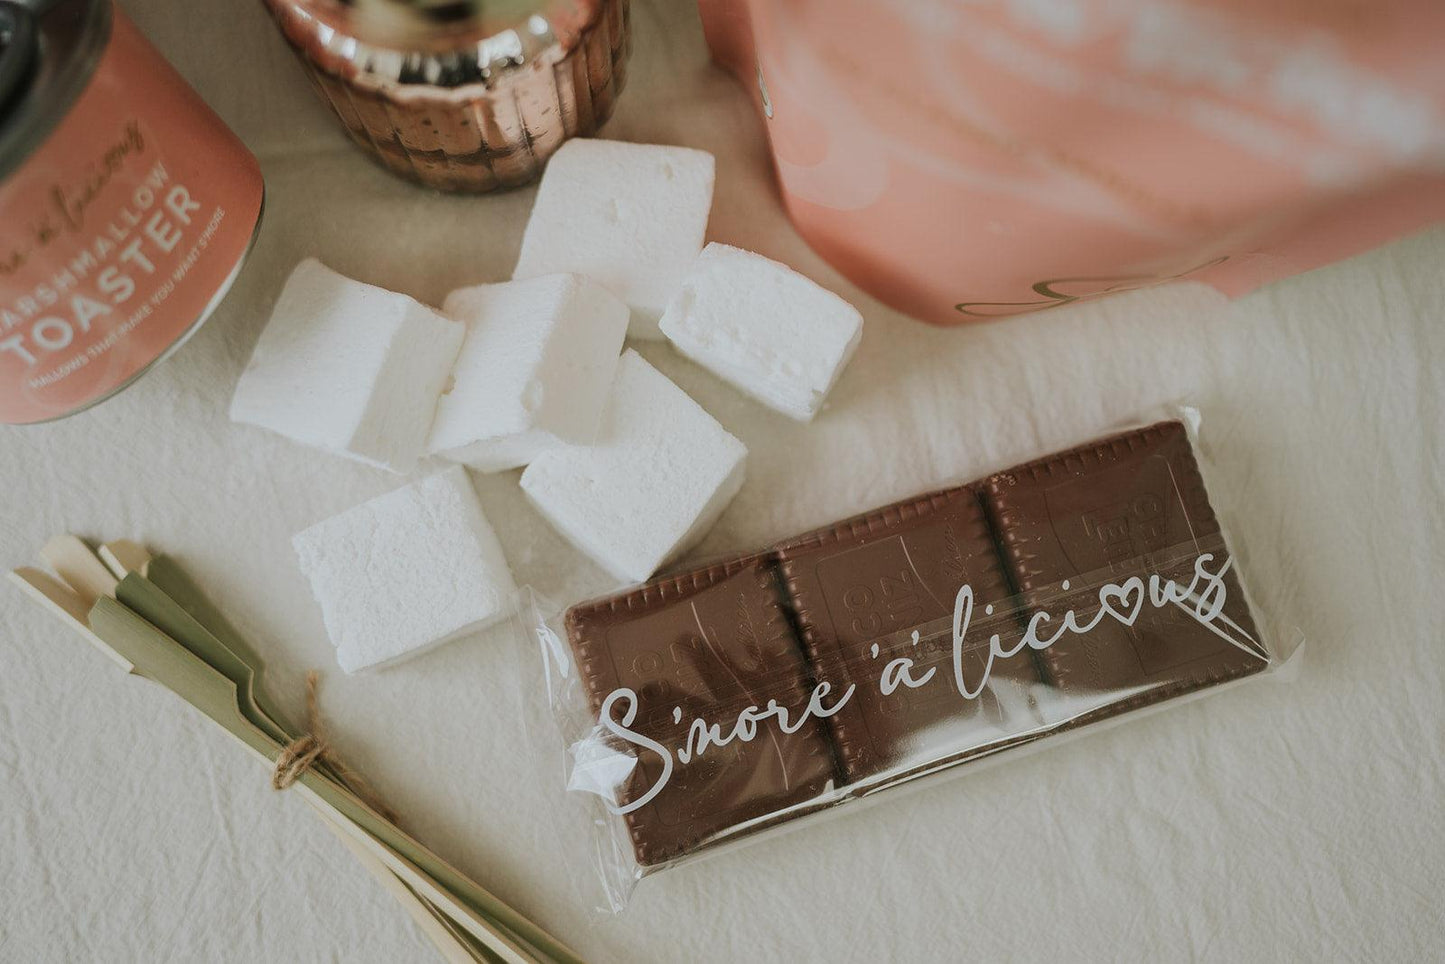 Full DIY Marshmallow S'mores Station - S’more’a’licious -<code> smorealicious.com </code>Handmade gifts and treats made in Northern Ireland